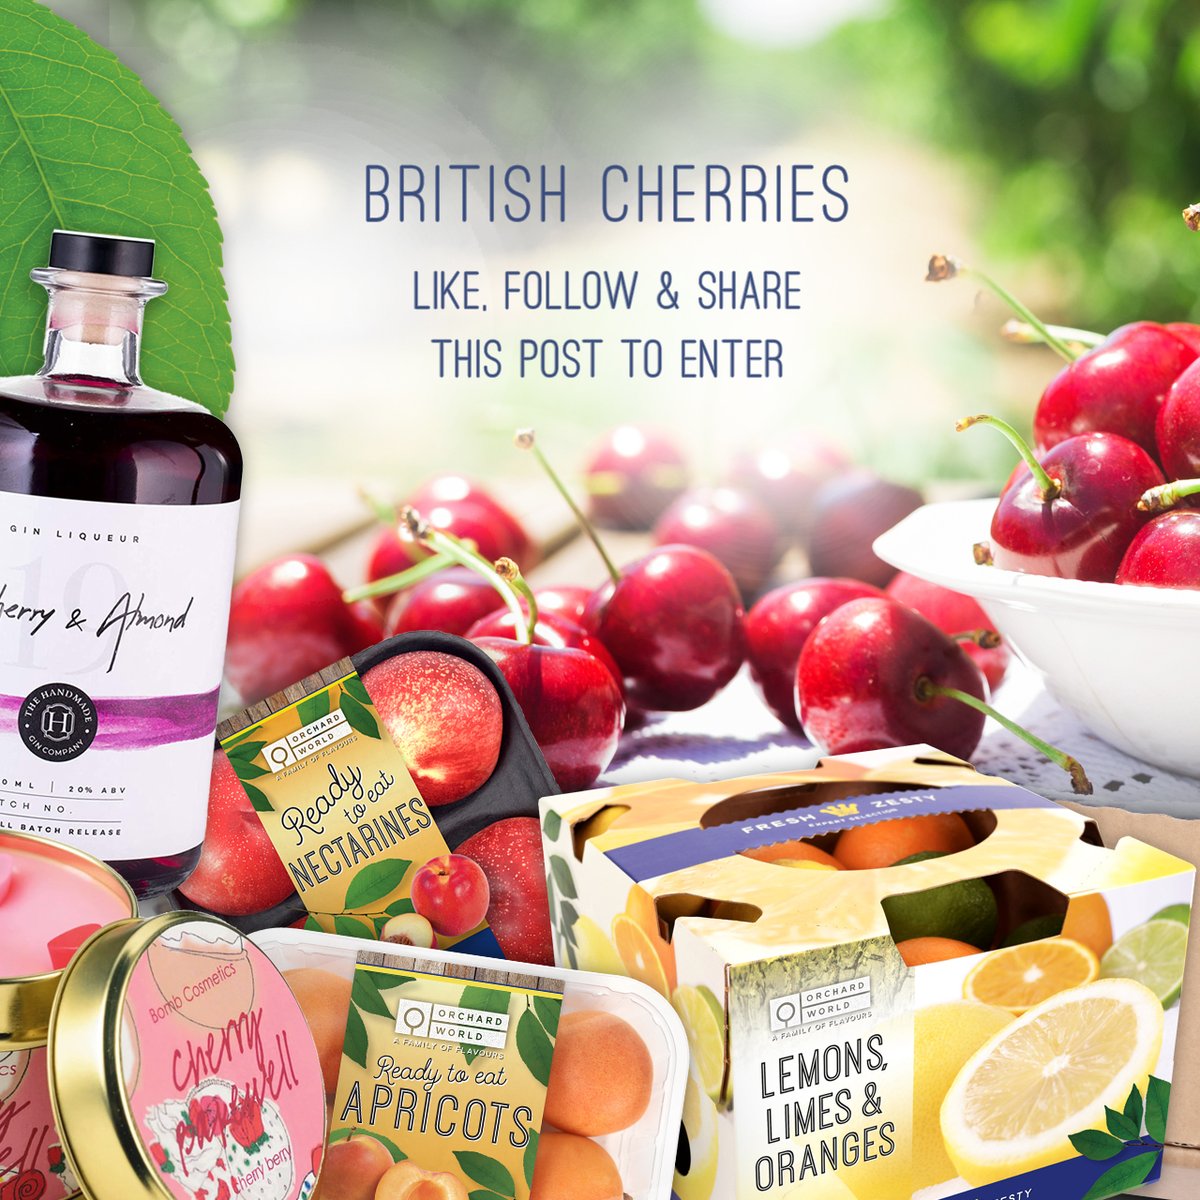 Win this indulgent hamper, full of wonderful seasonal fruit, with some added extras:

1 x OrchardWorld Mixed Citrus Box
1 x OrchardWorld Ripe and Ready Nectarines
1 x OrchardWorld Cherries
1 x OrchardWorld Blush Pears
1 x OrchardWorld Apple Box
1 x OrchardWorld Ripe and Ready…